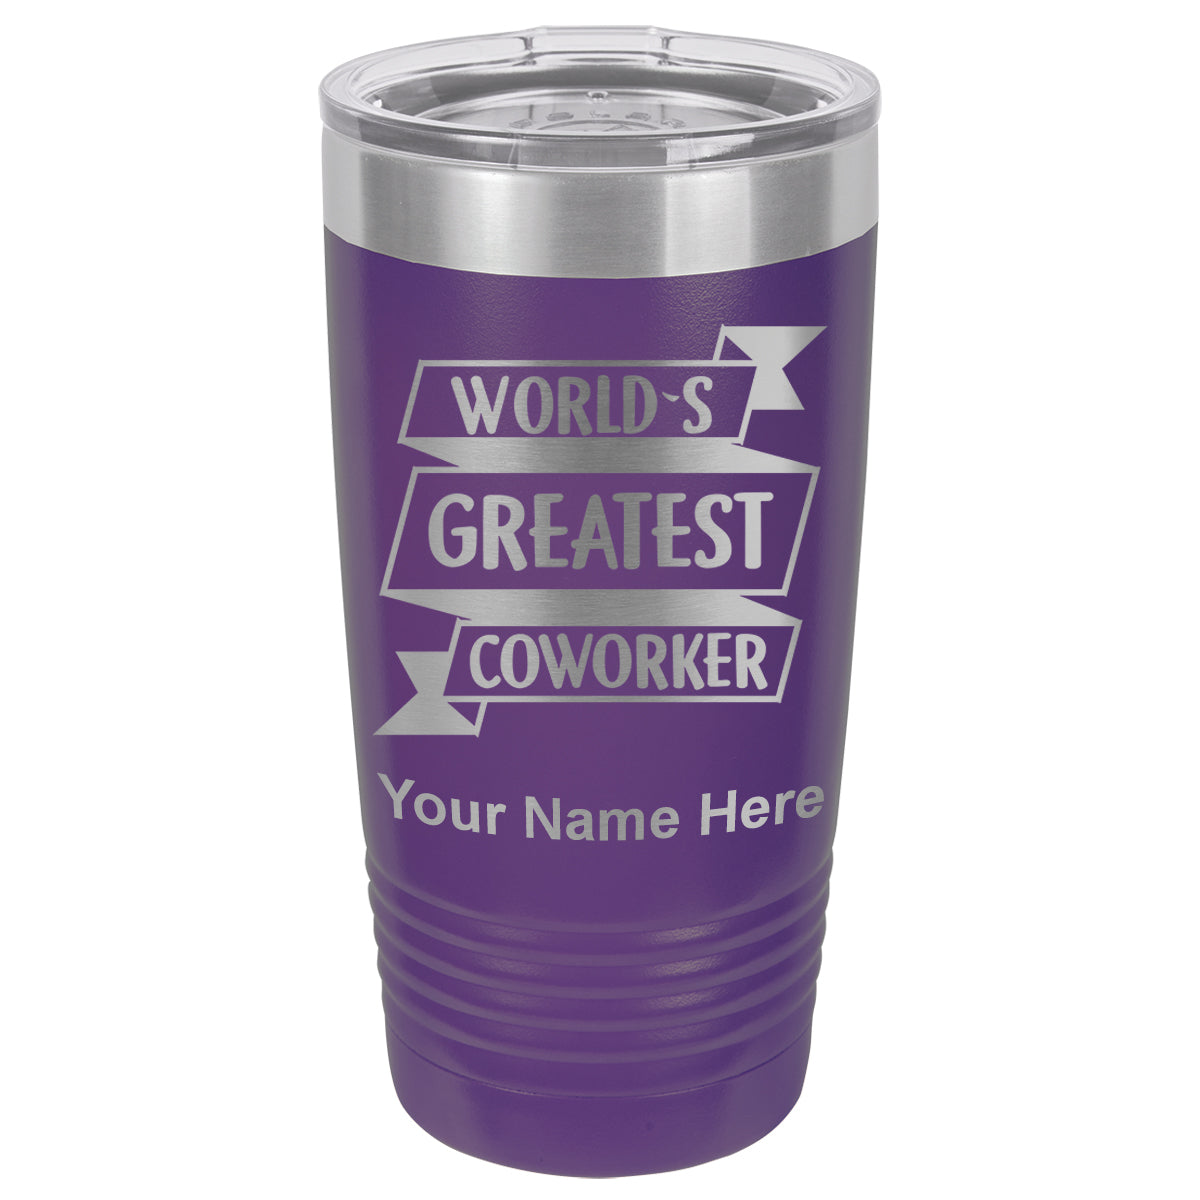 20oz Vacuum Insulated Tumbler Mug, World's Greatest Coworker, Personalized Engraving Included